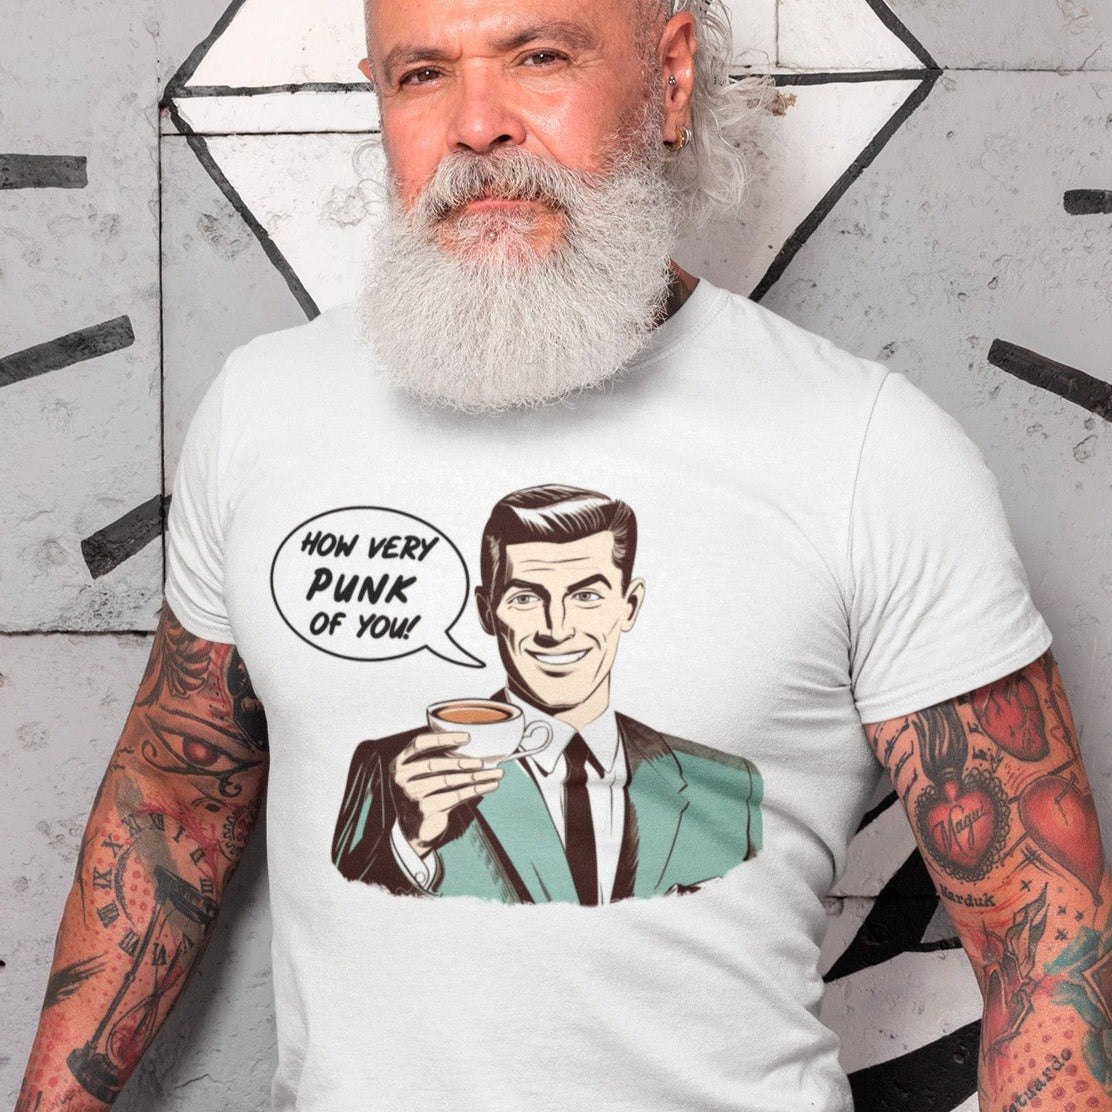 punk-coffee-funny-cartoon-white-t-shirt-tee-mockup-featuring-a-senior-man-with-a-white-beard-and-tattoos